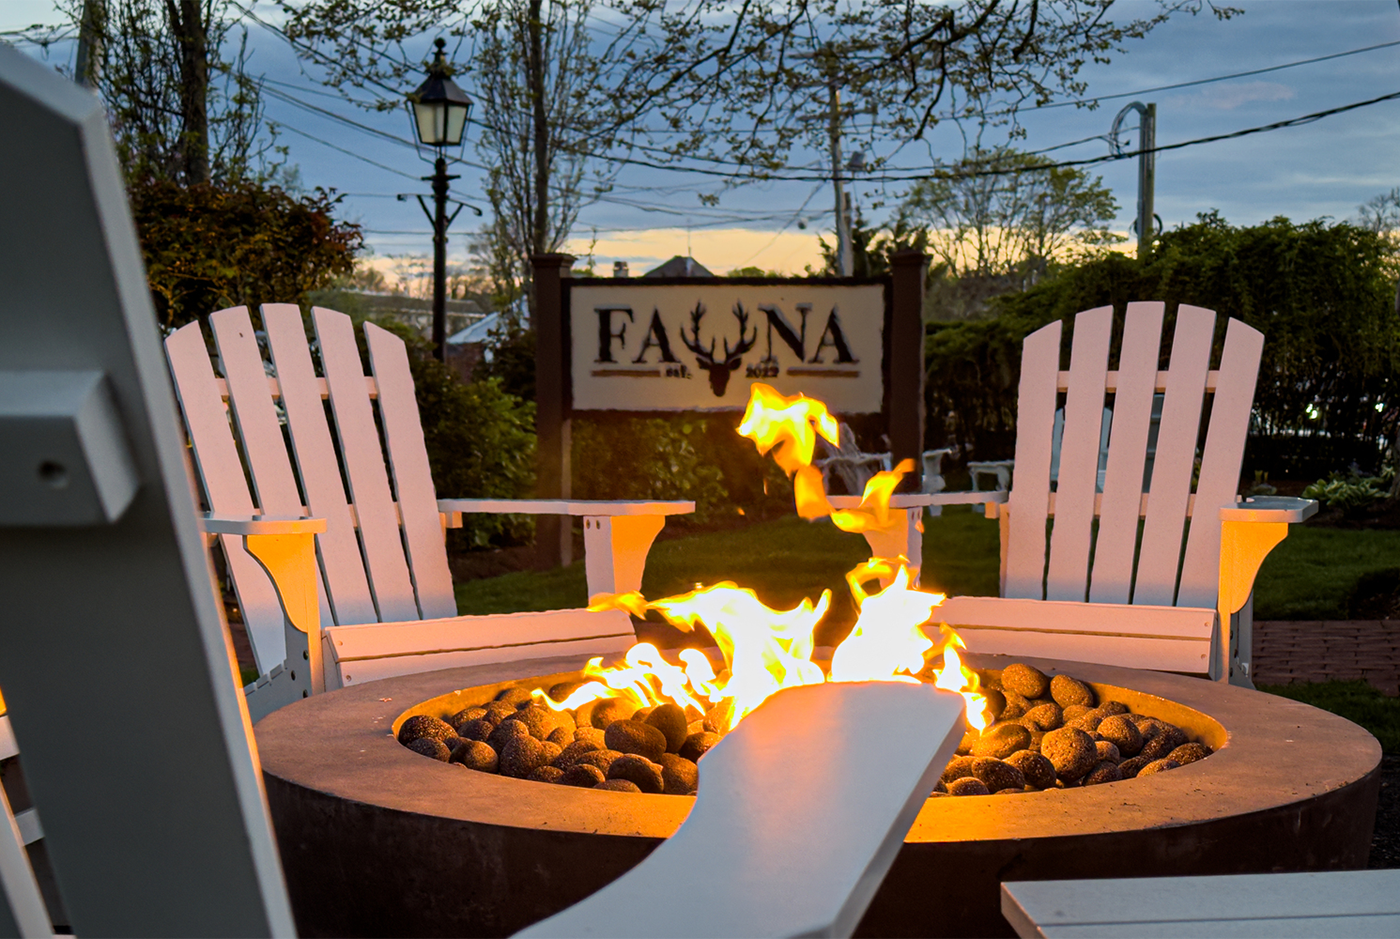 A firepit in the evening at Fauna a restaurant in the Hamptons